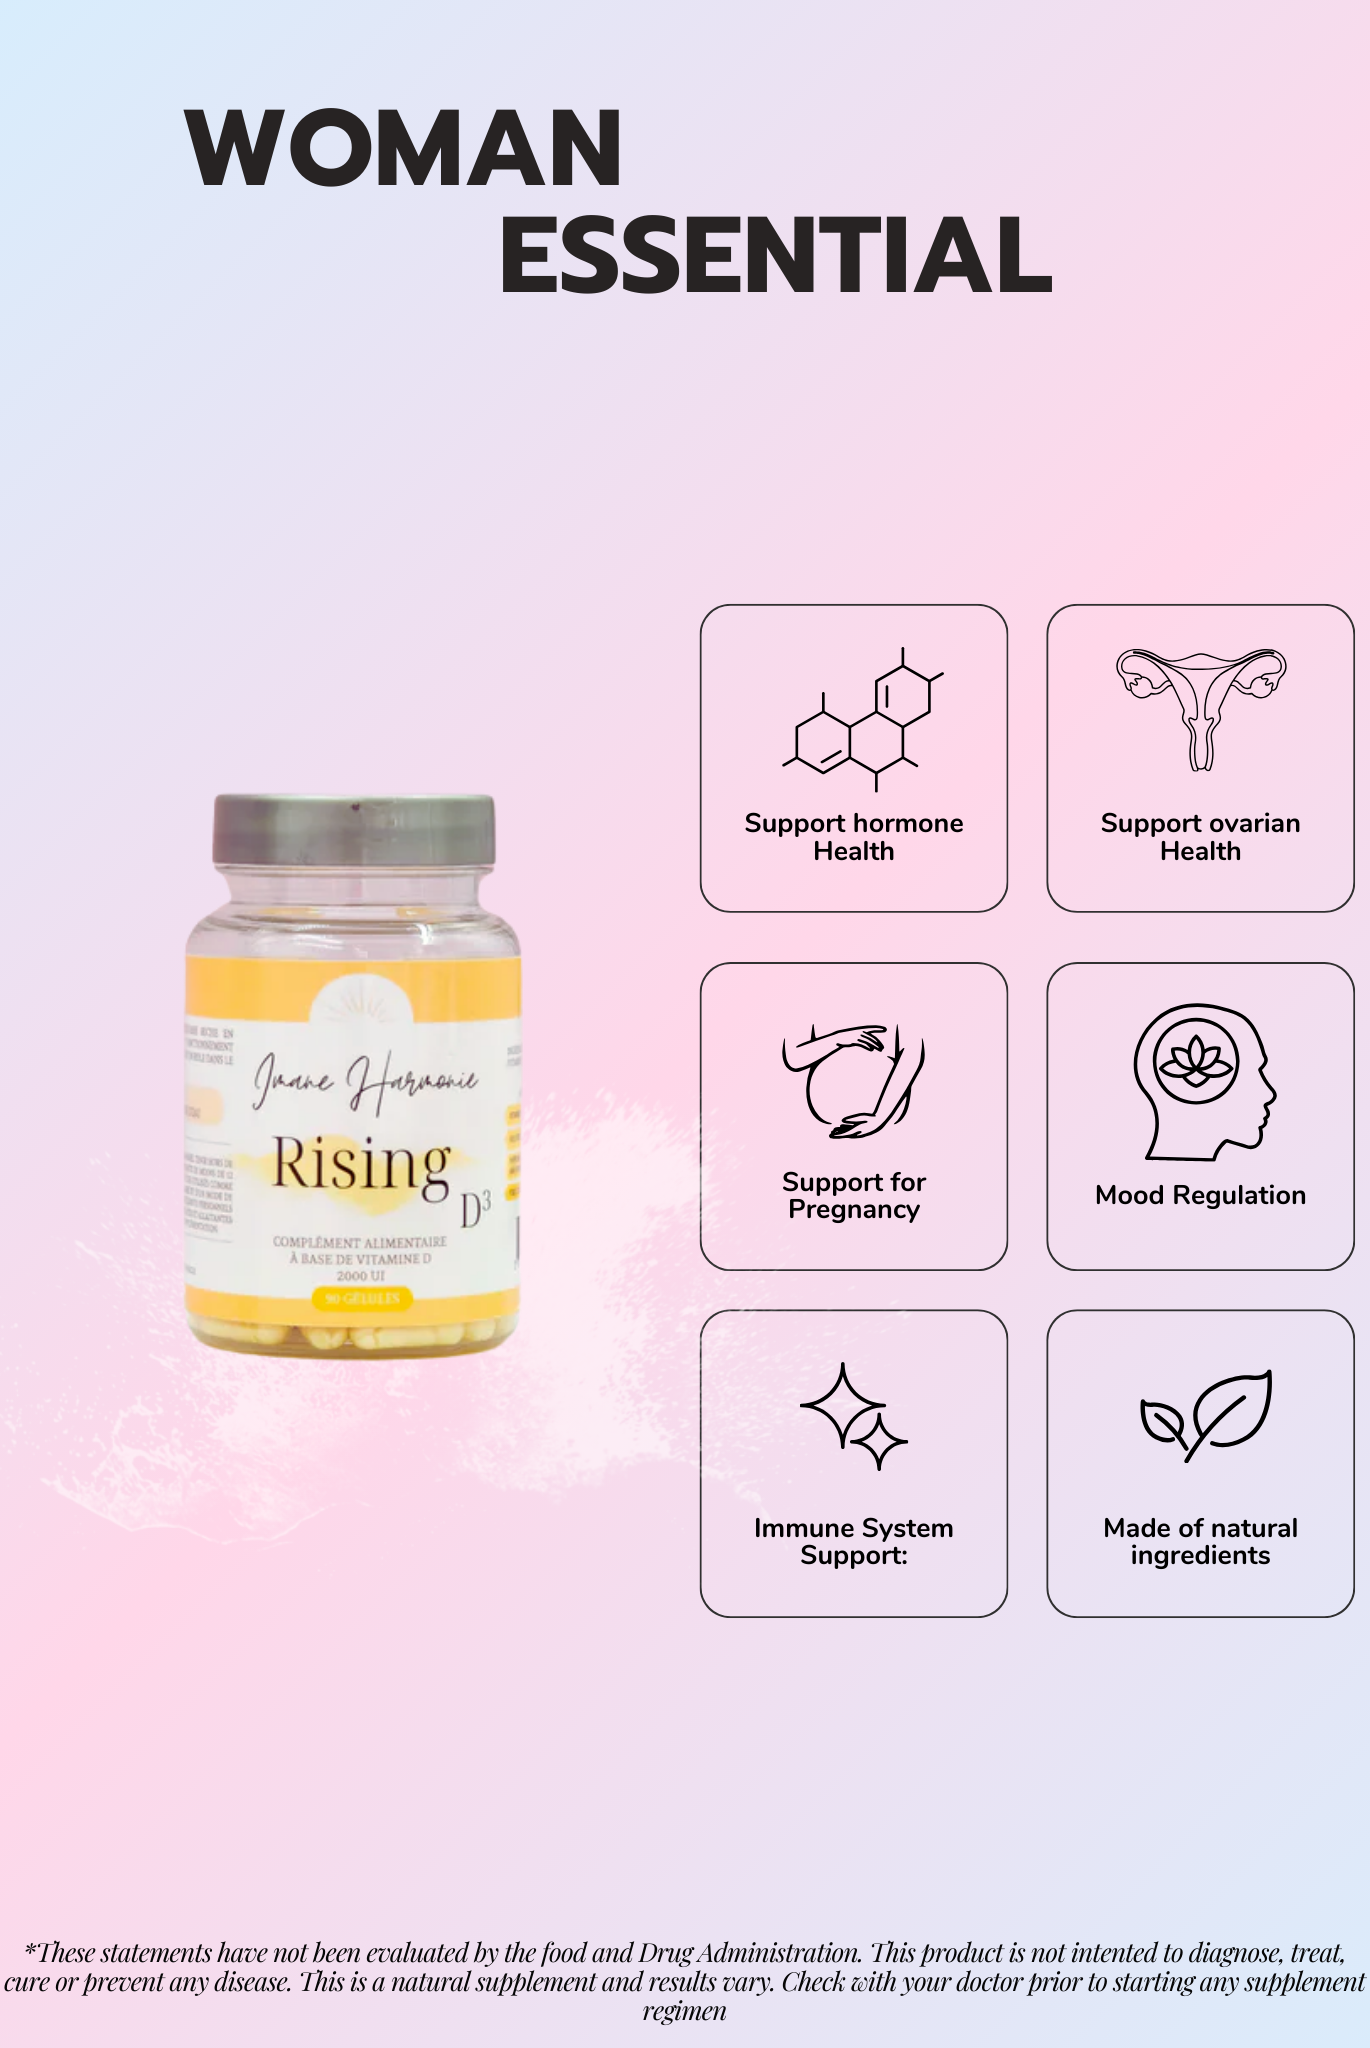 Features of Rising D3 supplement : support hormone health, support ovarian health, support for pregnancy, mood regulation, immune system support, made of natural ingredients